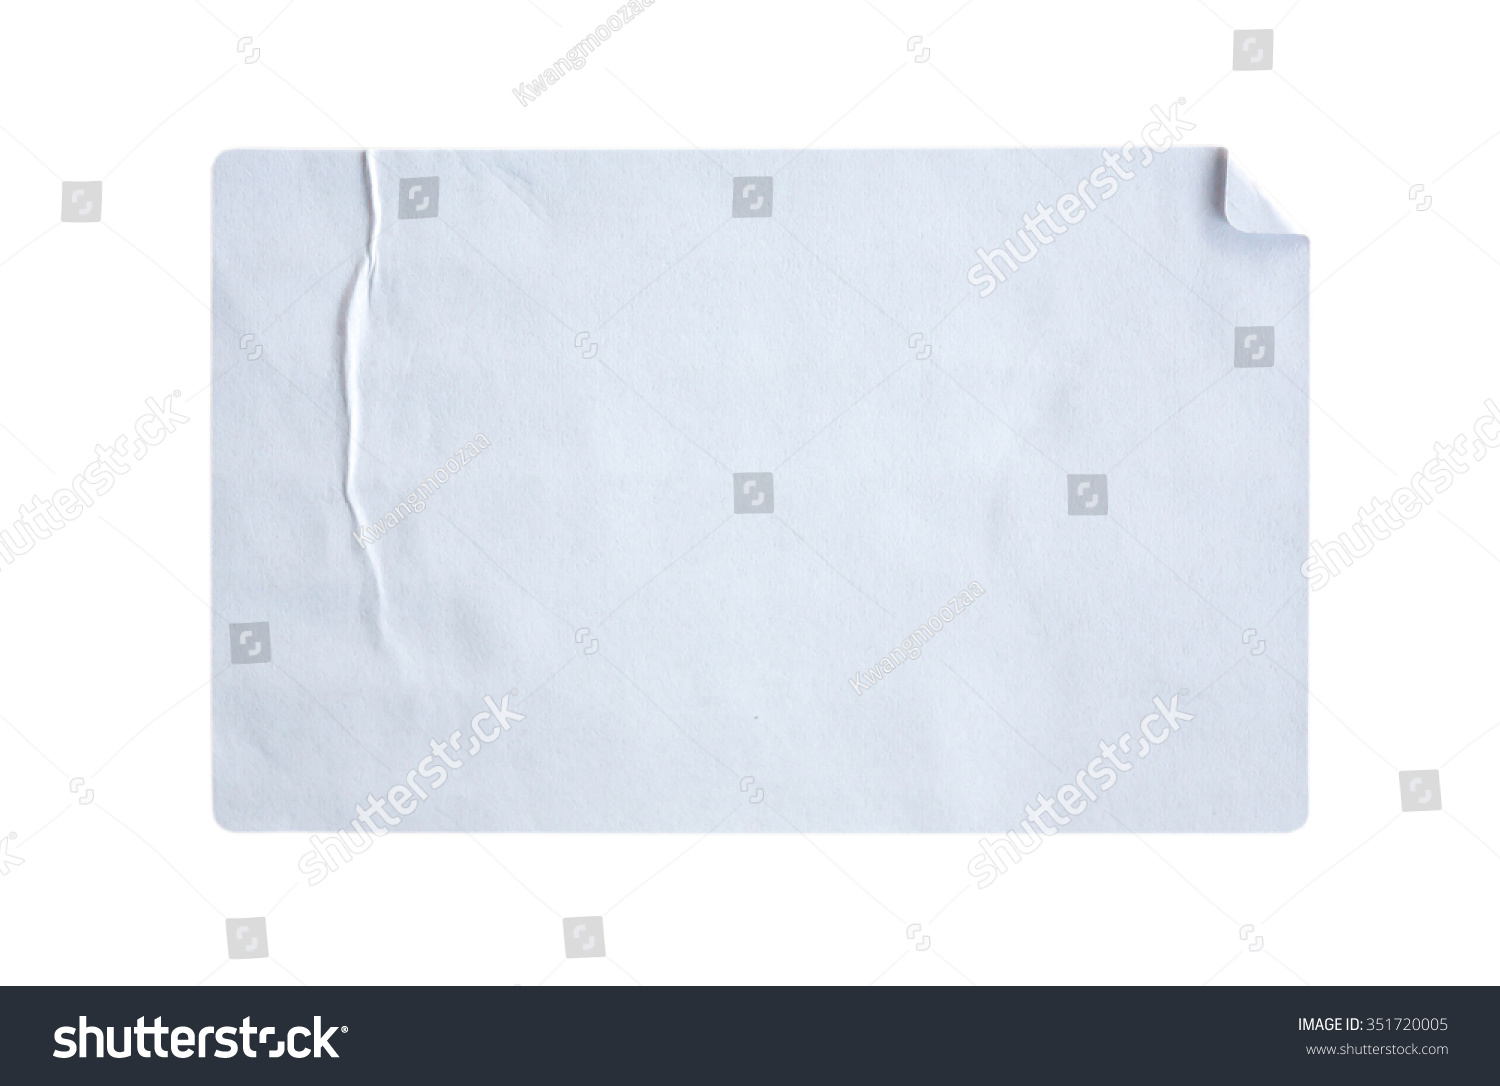 Stickers label isolated on white background #351720005